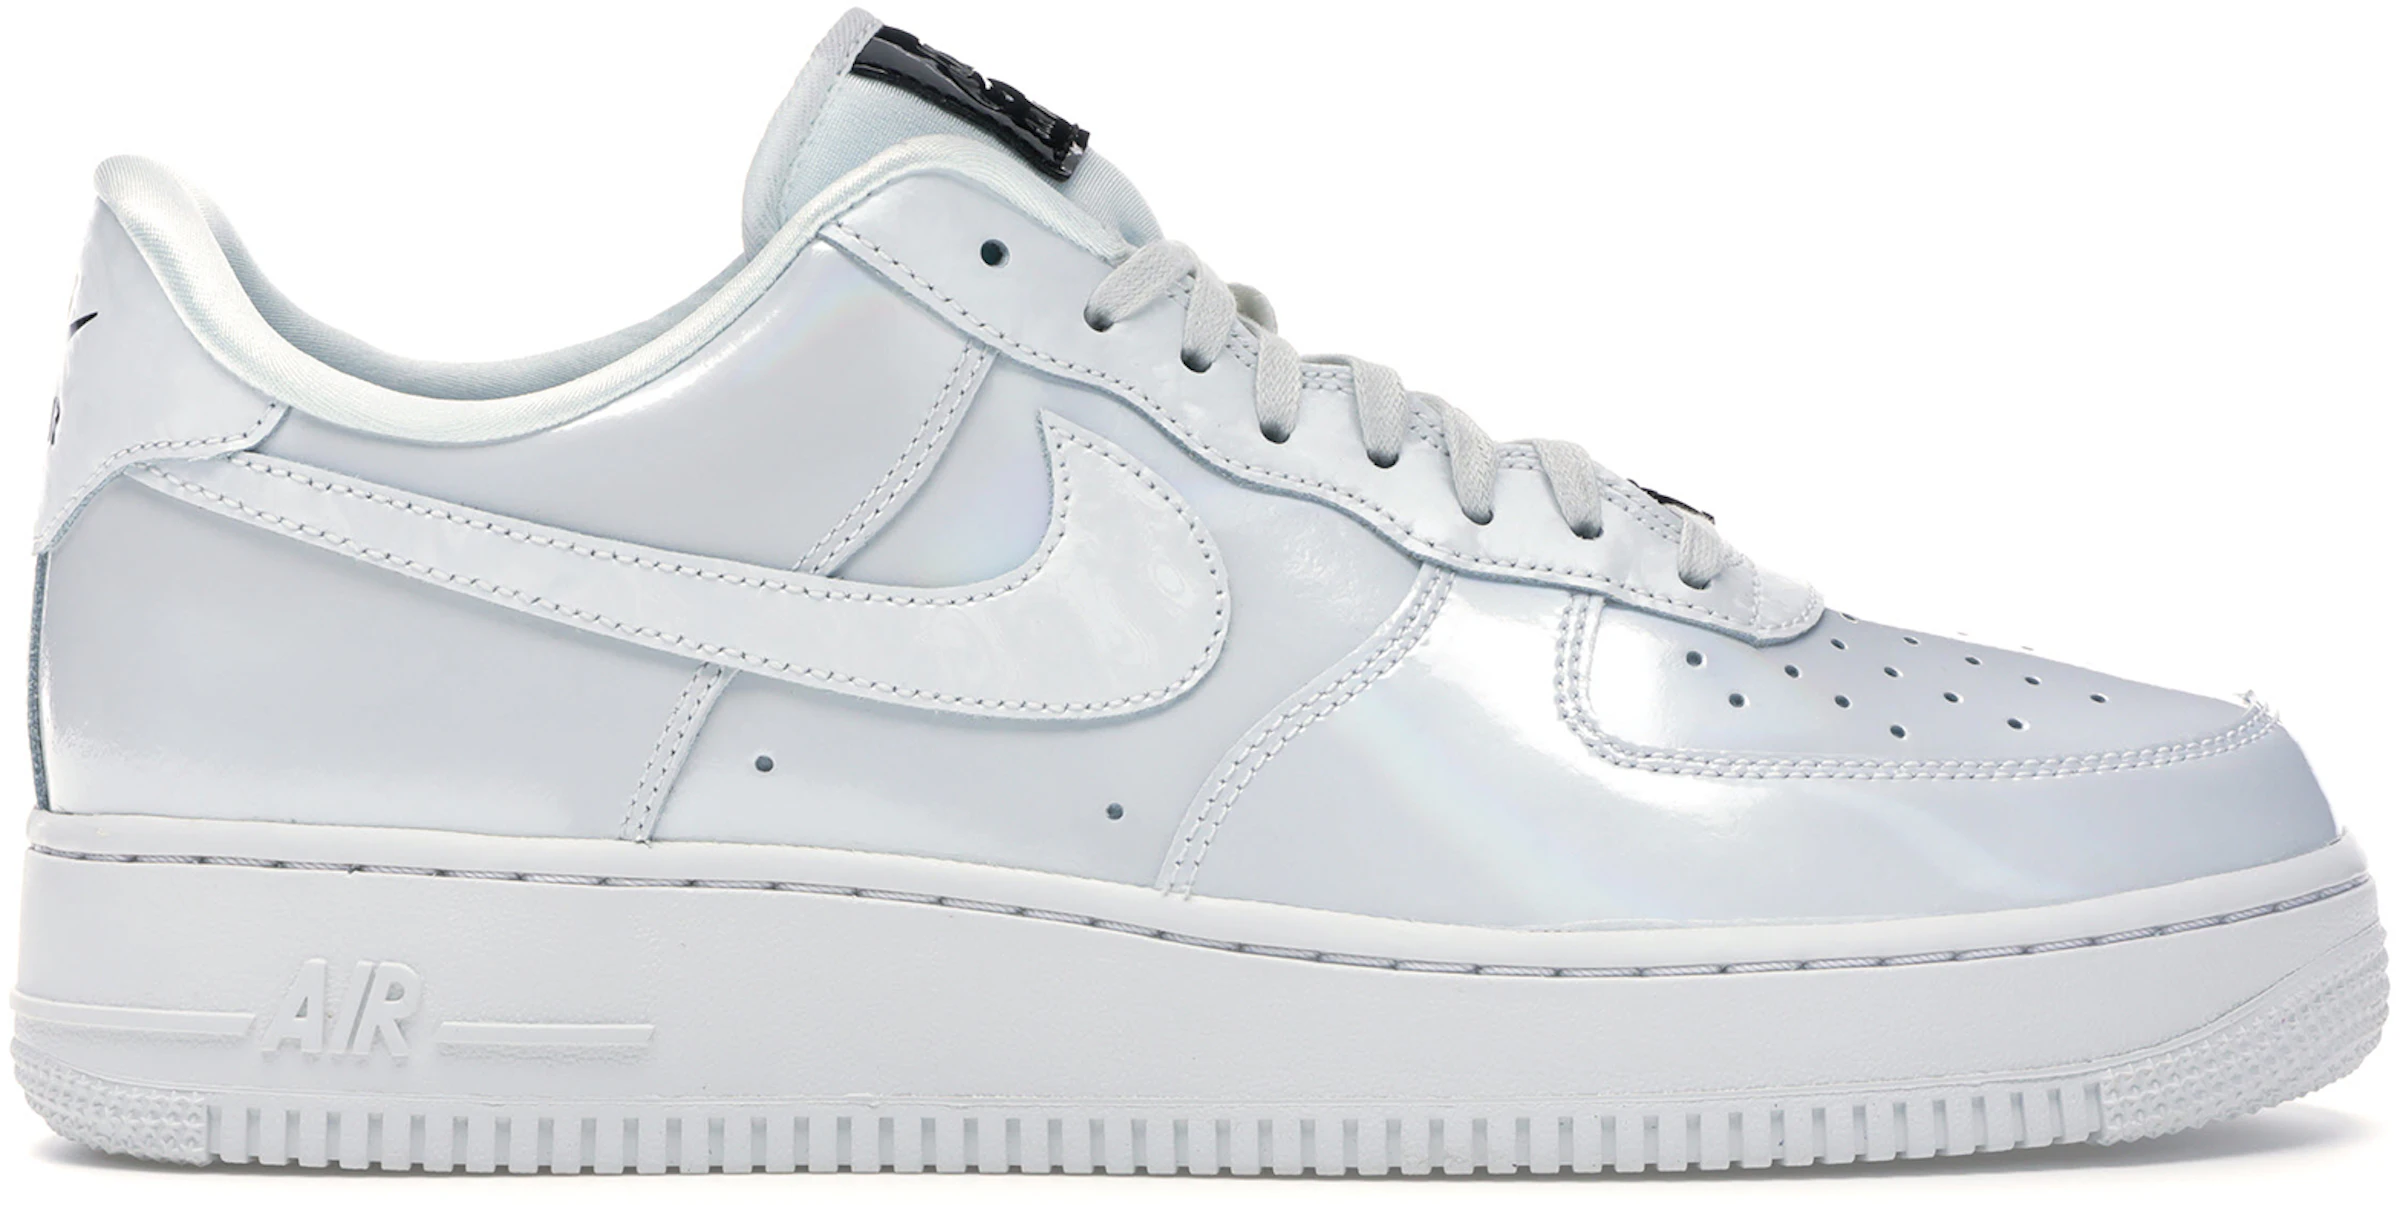 Nike Air Force 1 Low Lux All-Star White (Women's) - 898889-100 US